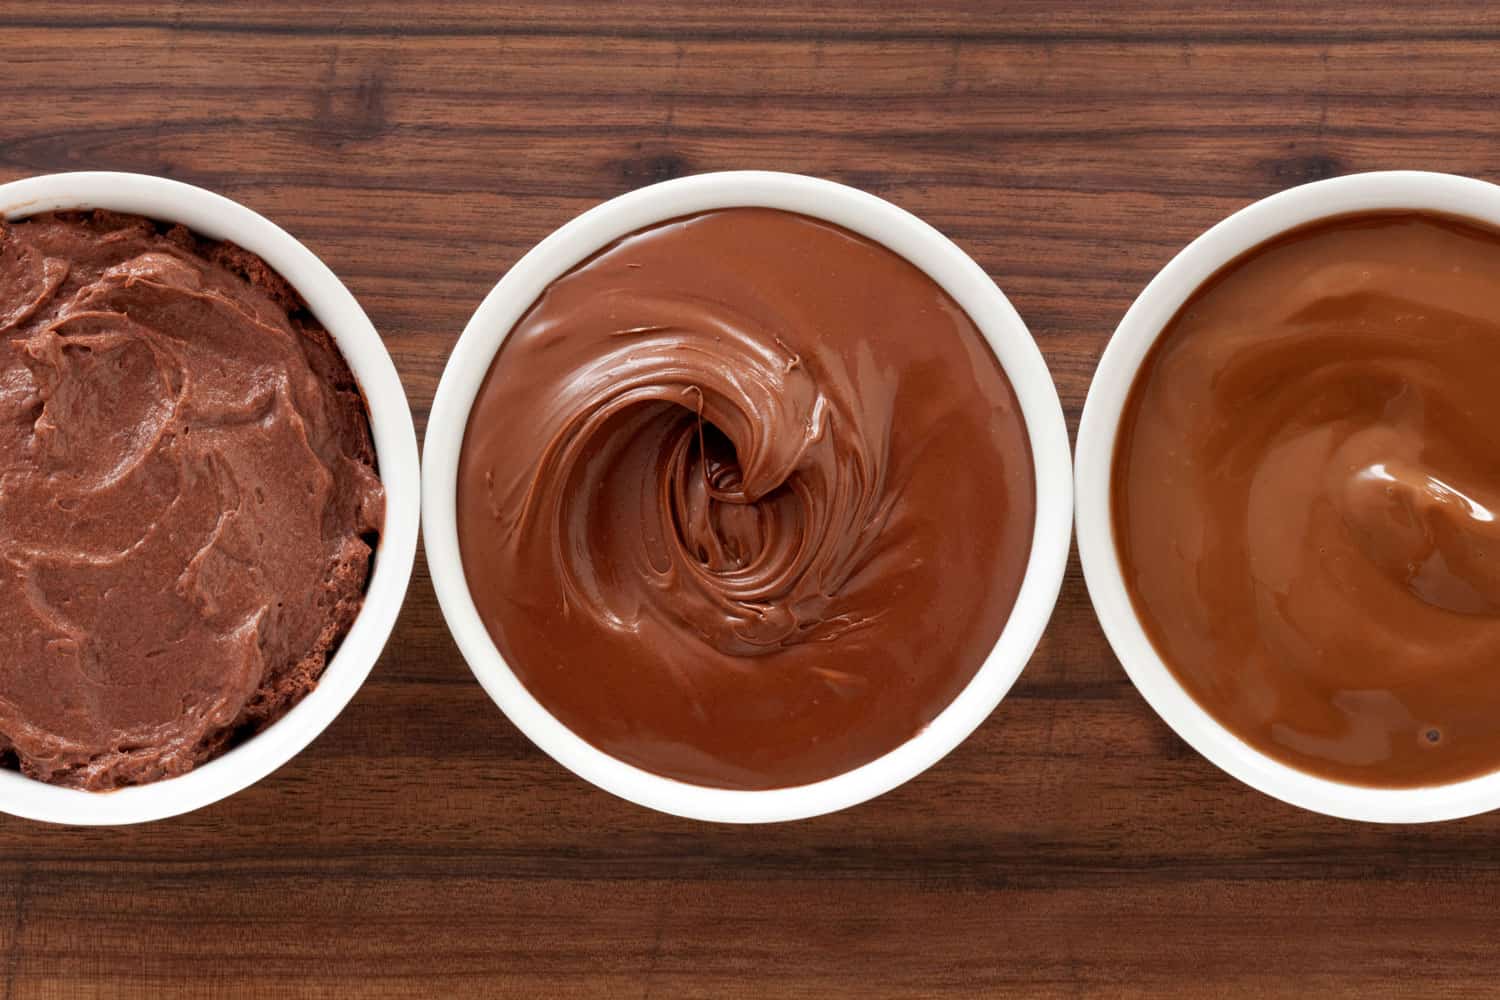 Determine your chocolate mousse if it can still be eated or not by smelling